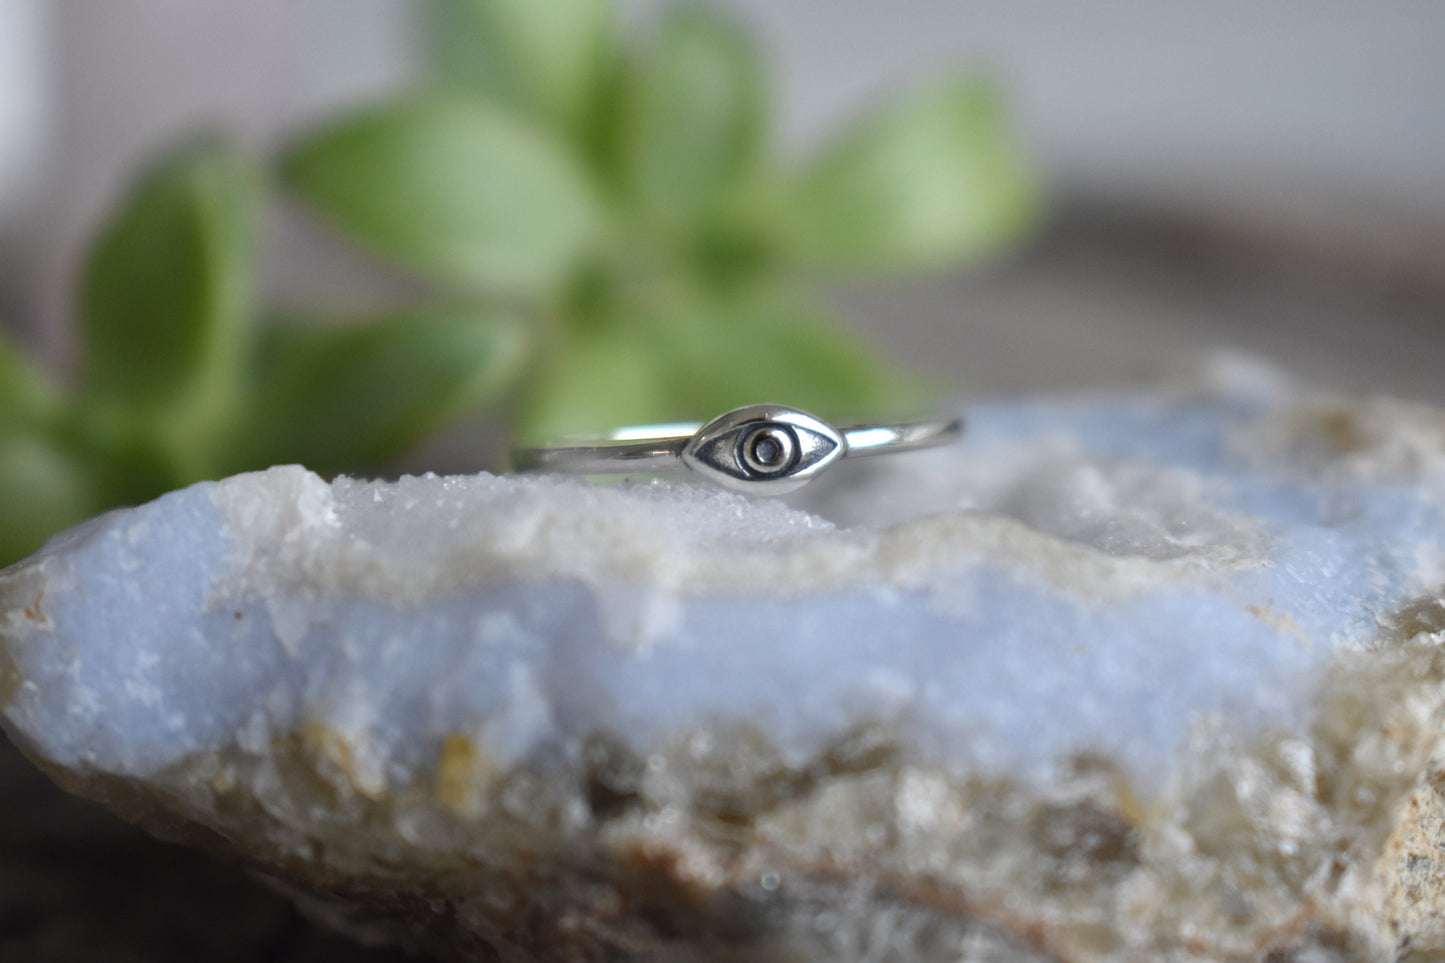 Evil Eye Ring- Silver Eye Ring, Witchy Jewelry, Fortune Telling- Silver Eye Ring